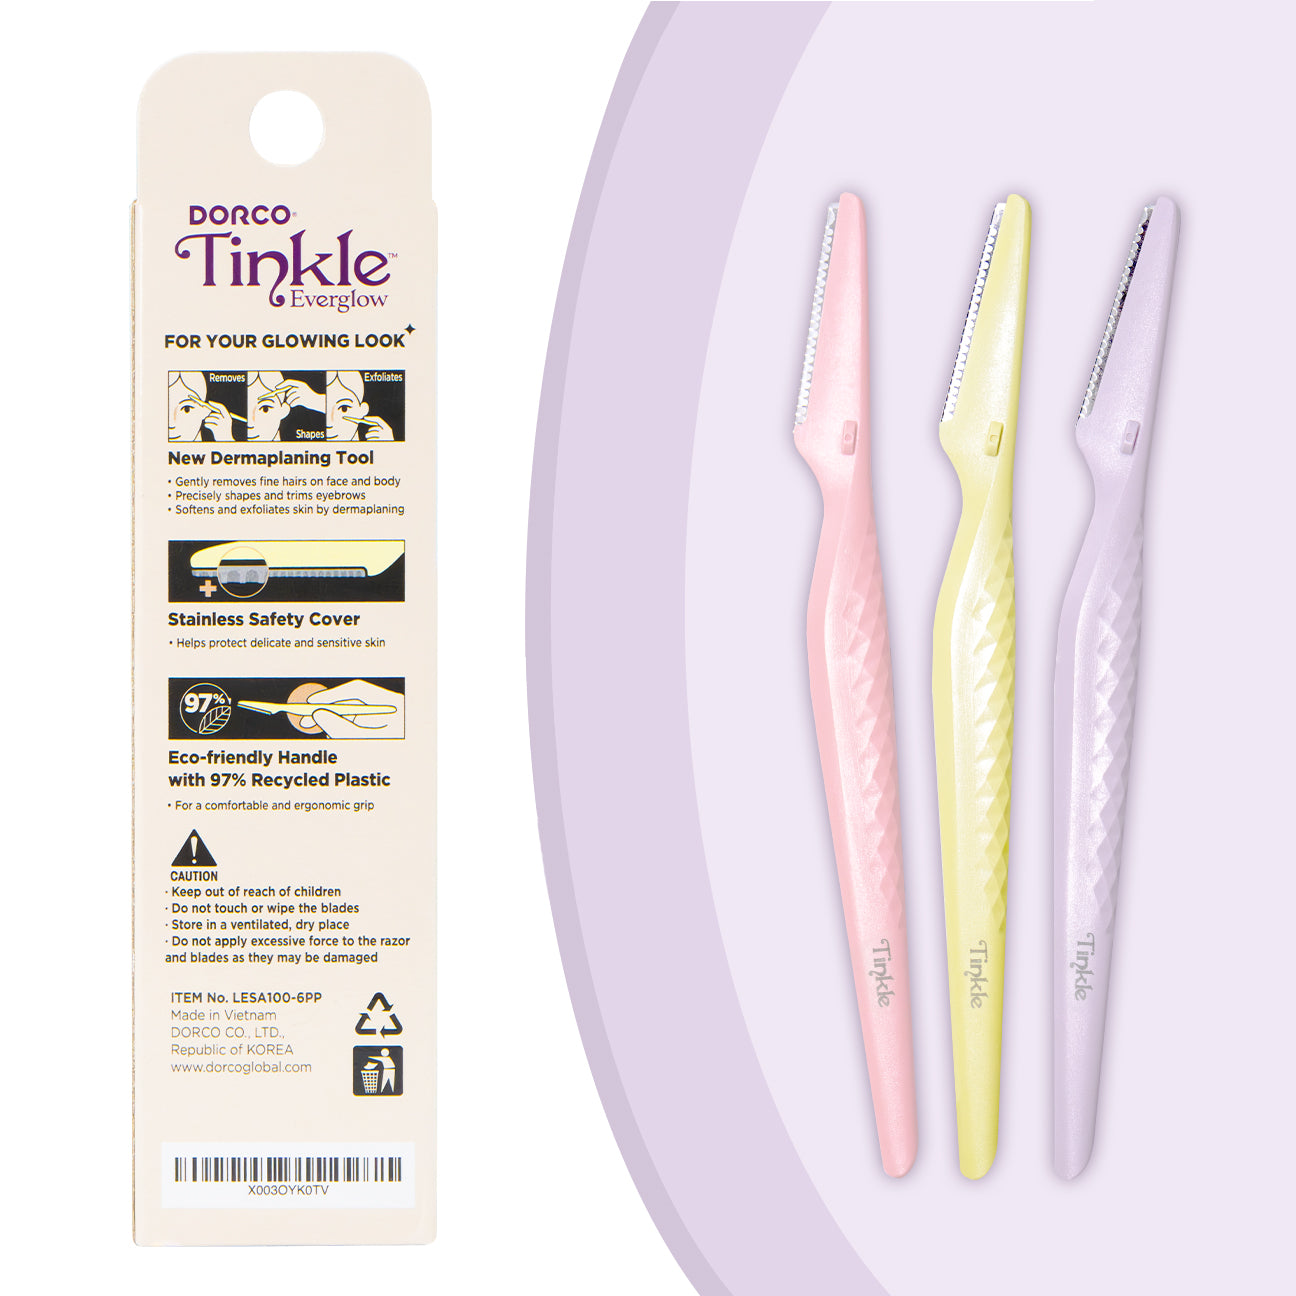 Tinkle 2 Everglow - The Dermaplanning Tool (3 blades)